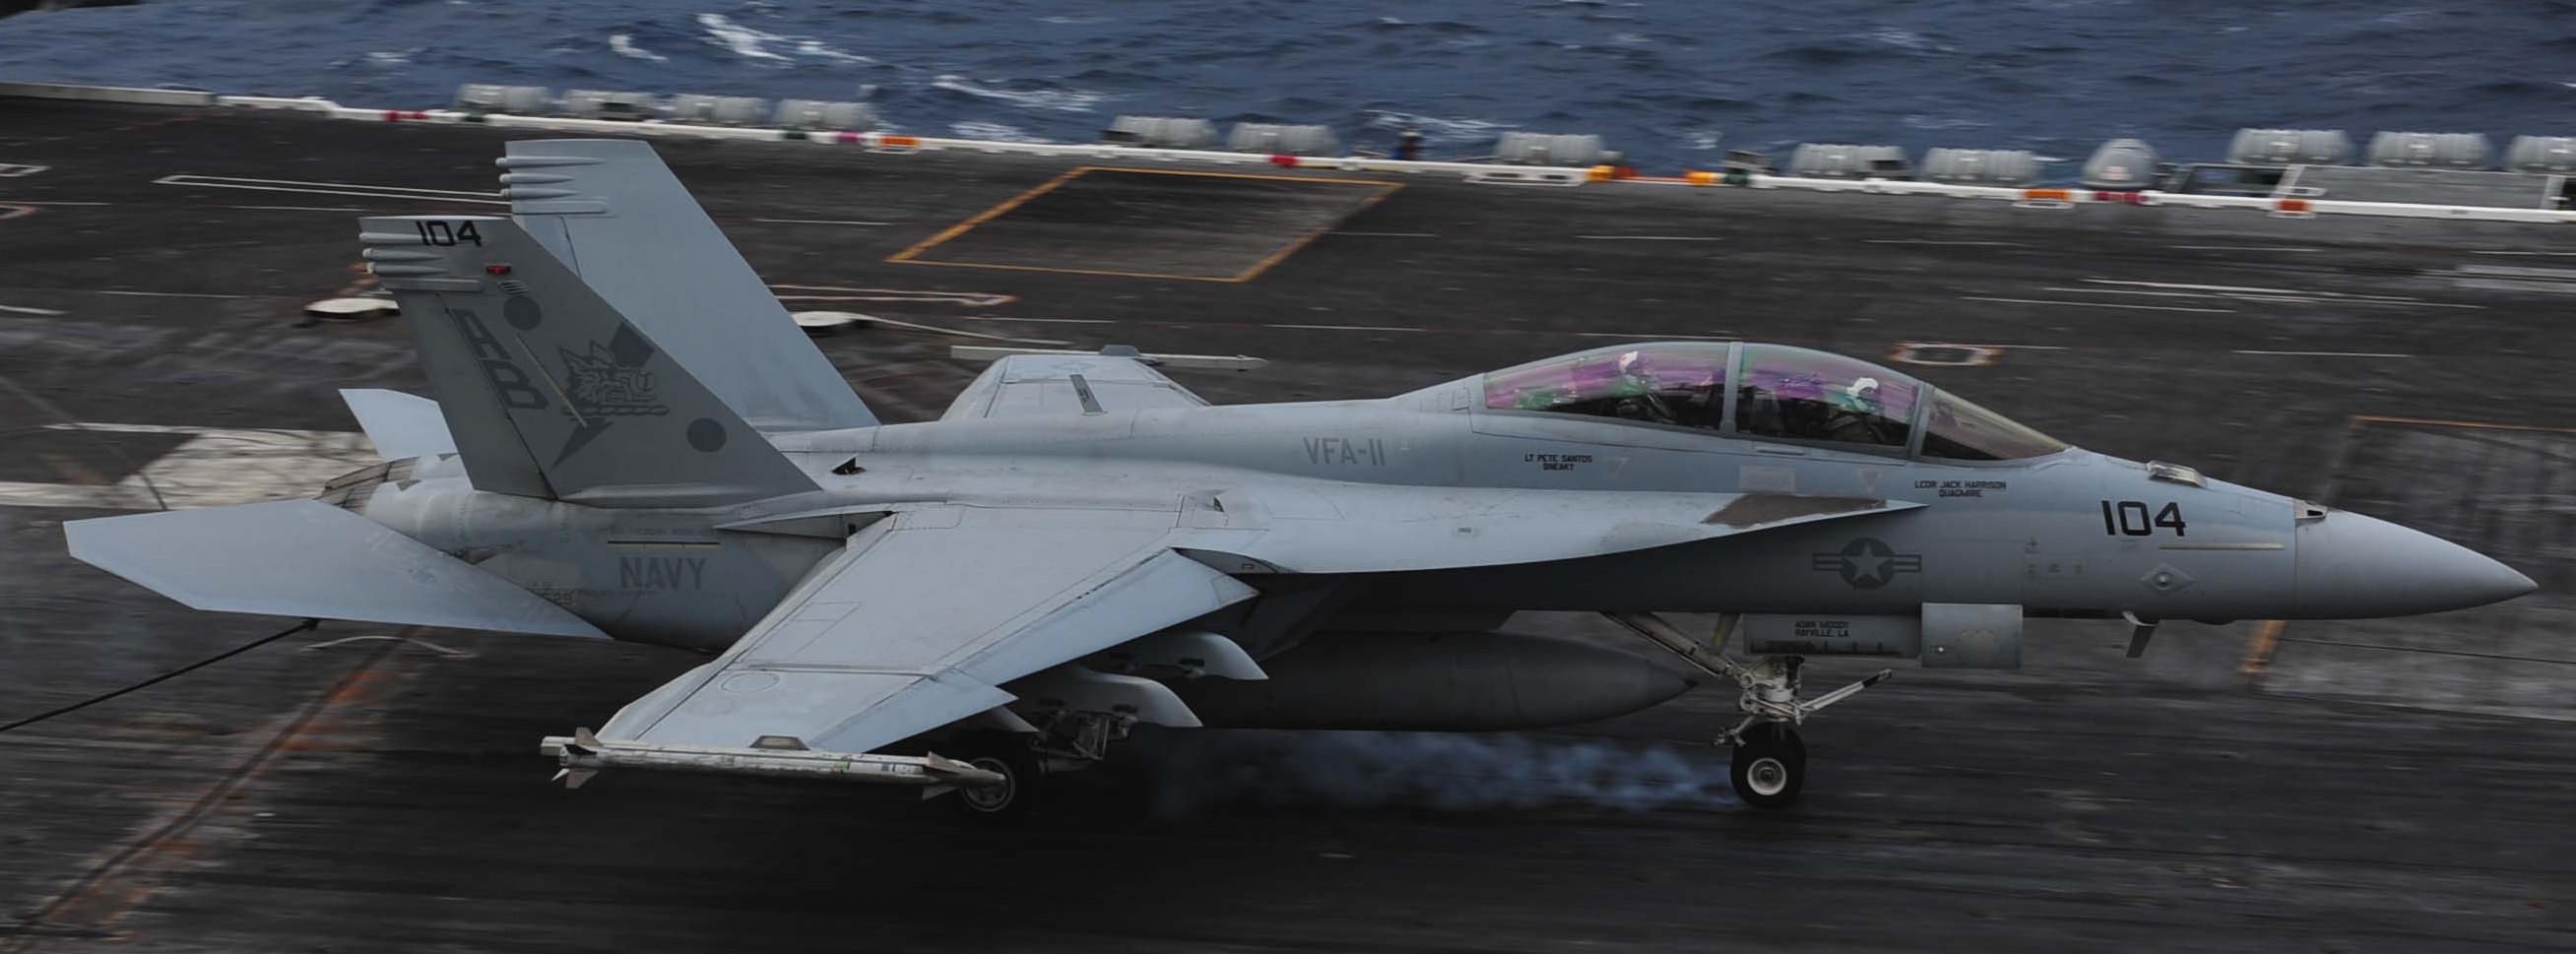 vfa-11 red rippers strike fighter squadron us navy f/a-18f super hornet carrier air wing cvw-1 uss theodore roosevelt cvn-71 14